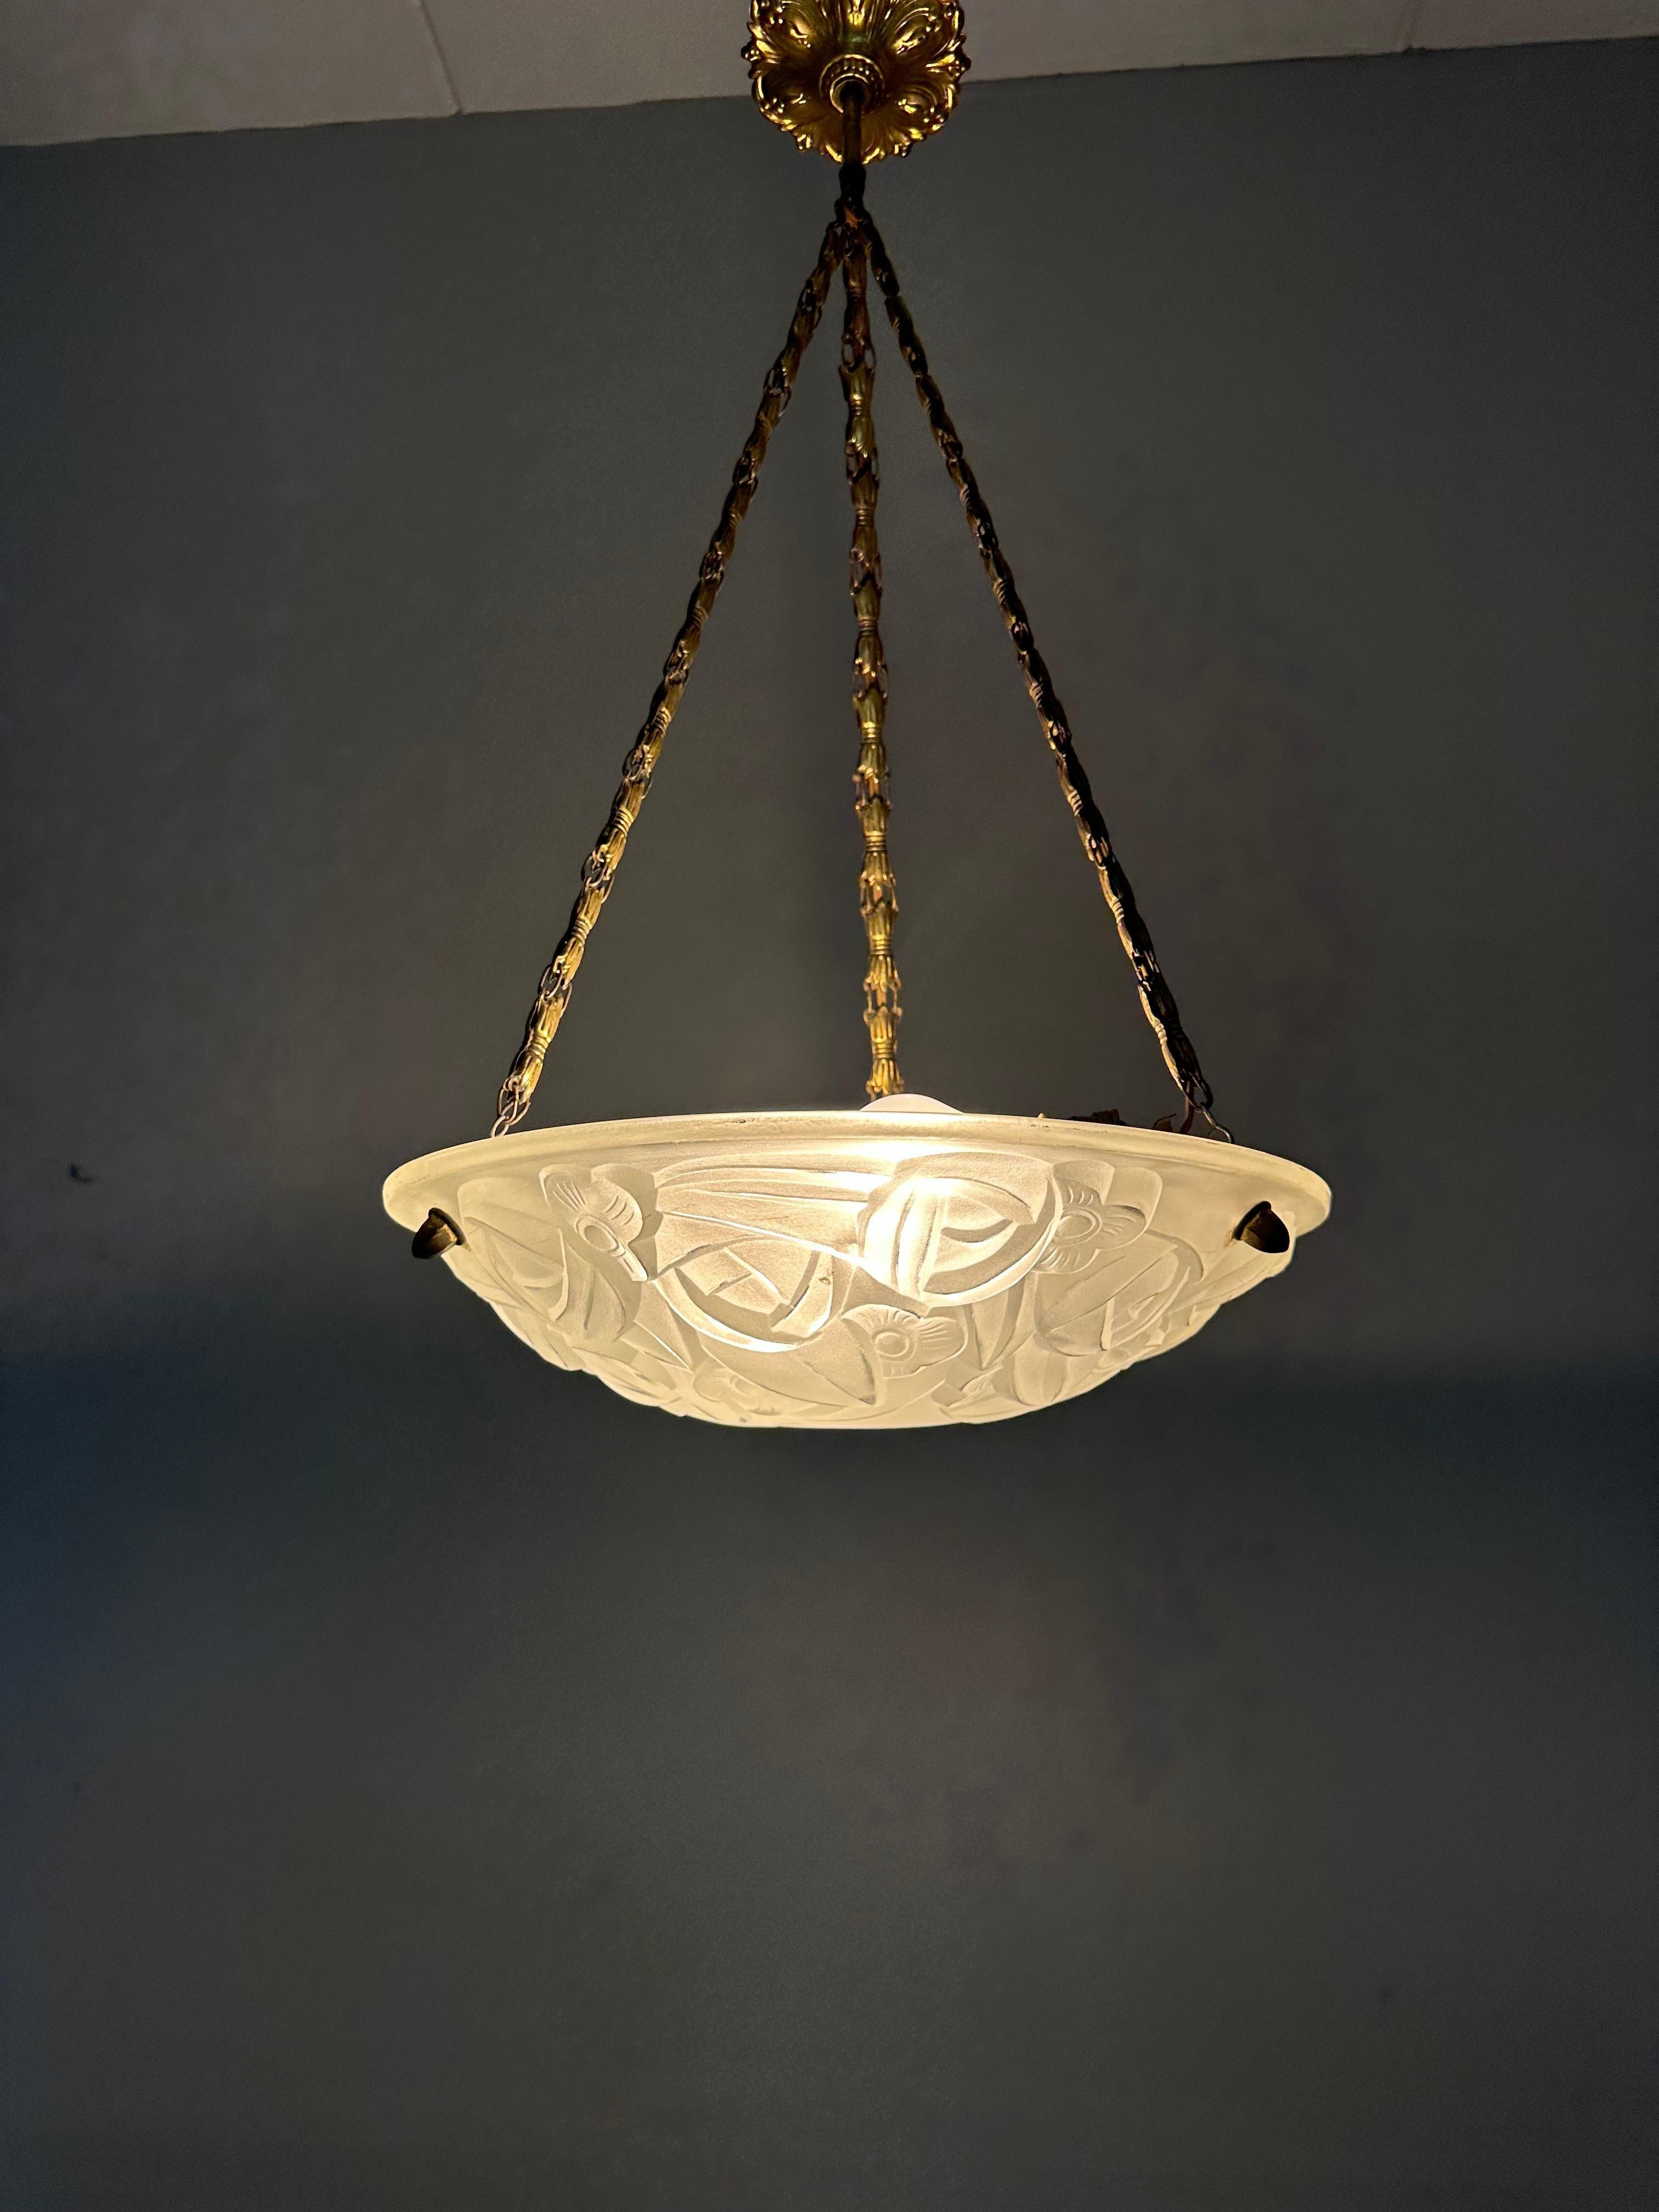 Another top quality, antique French pendant light with a perfect Art Deco design.

This stunning and finer quality Art Deco ceiling lamp was realized by the fabled glass studio, Degue in France, in circa 1920/1930. The stylish shade -in frosted and